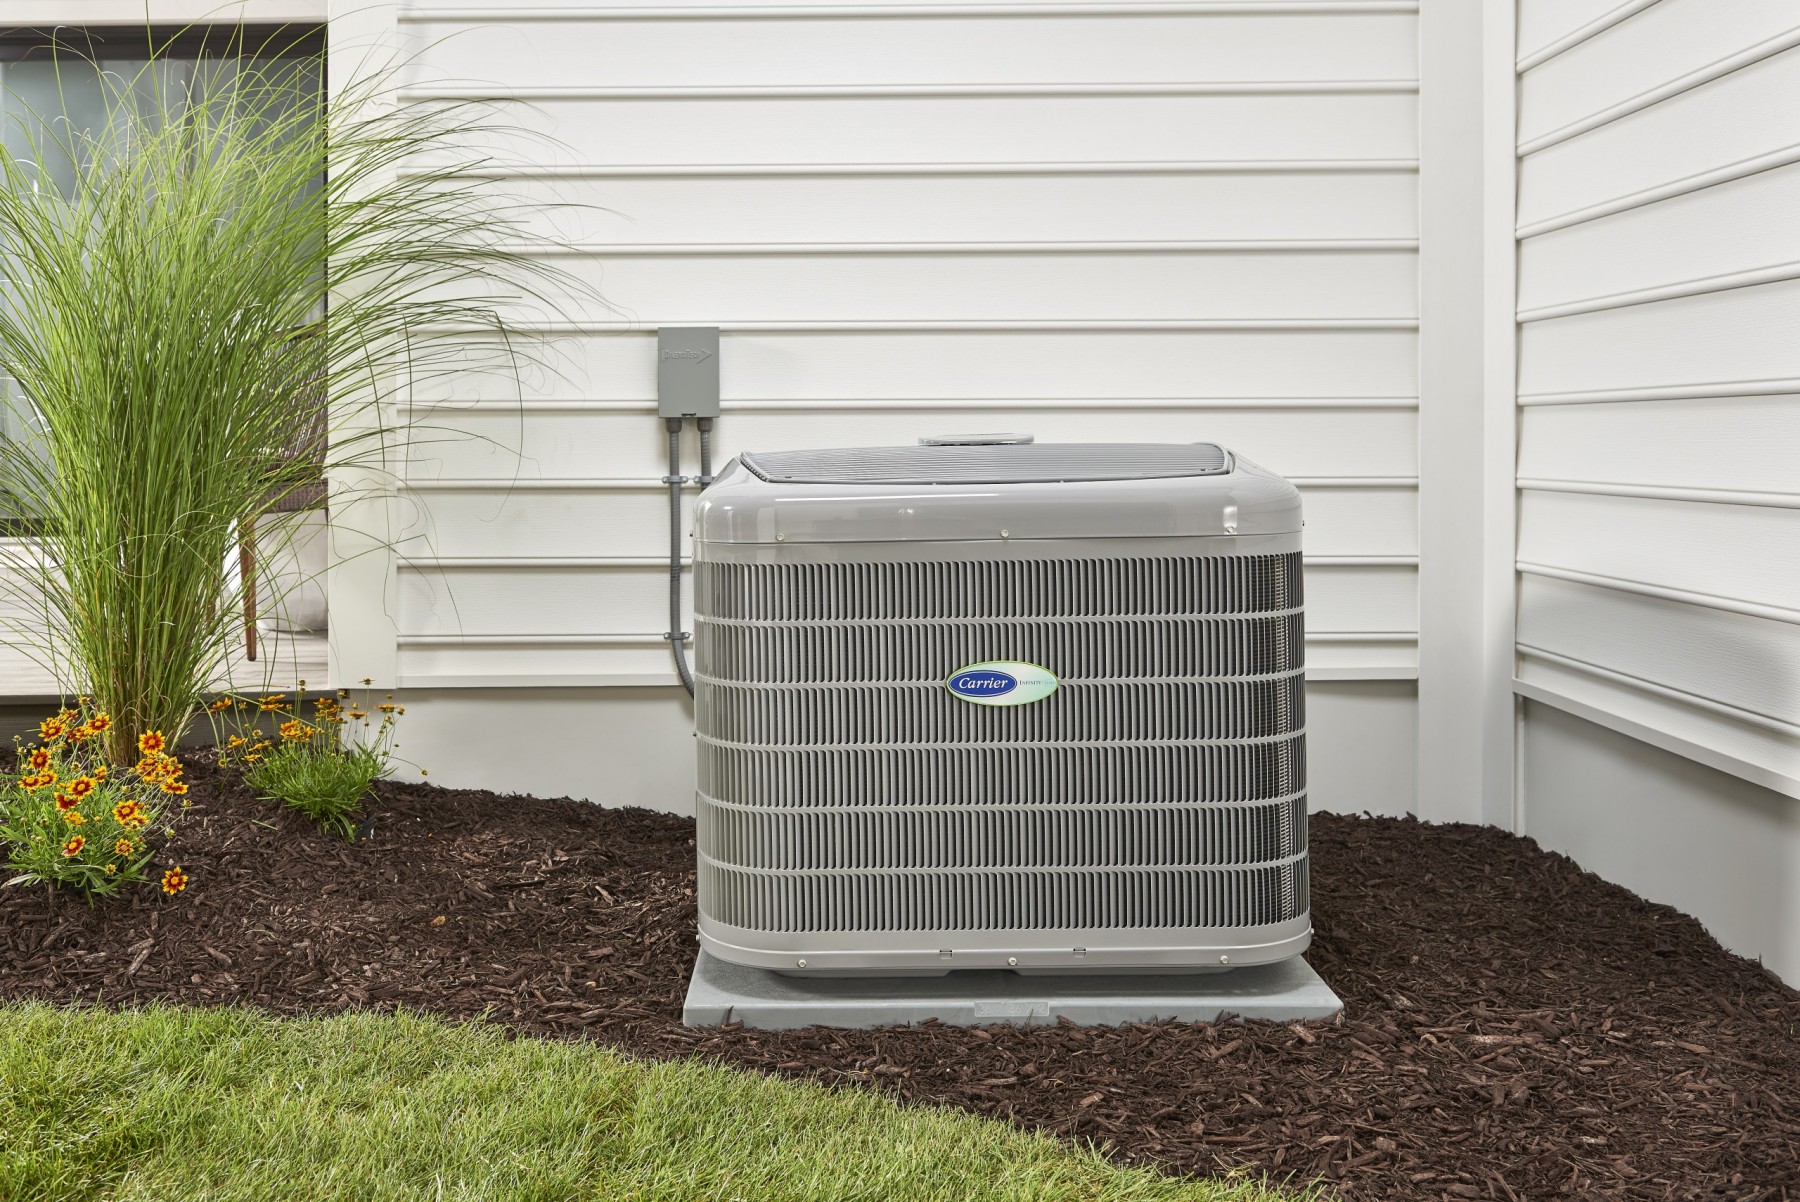 CPS is dedicated to being the best HVAC contractor in the Metrowest area by providing exceptional service and installation for quality conscious customers.